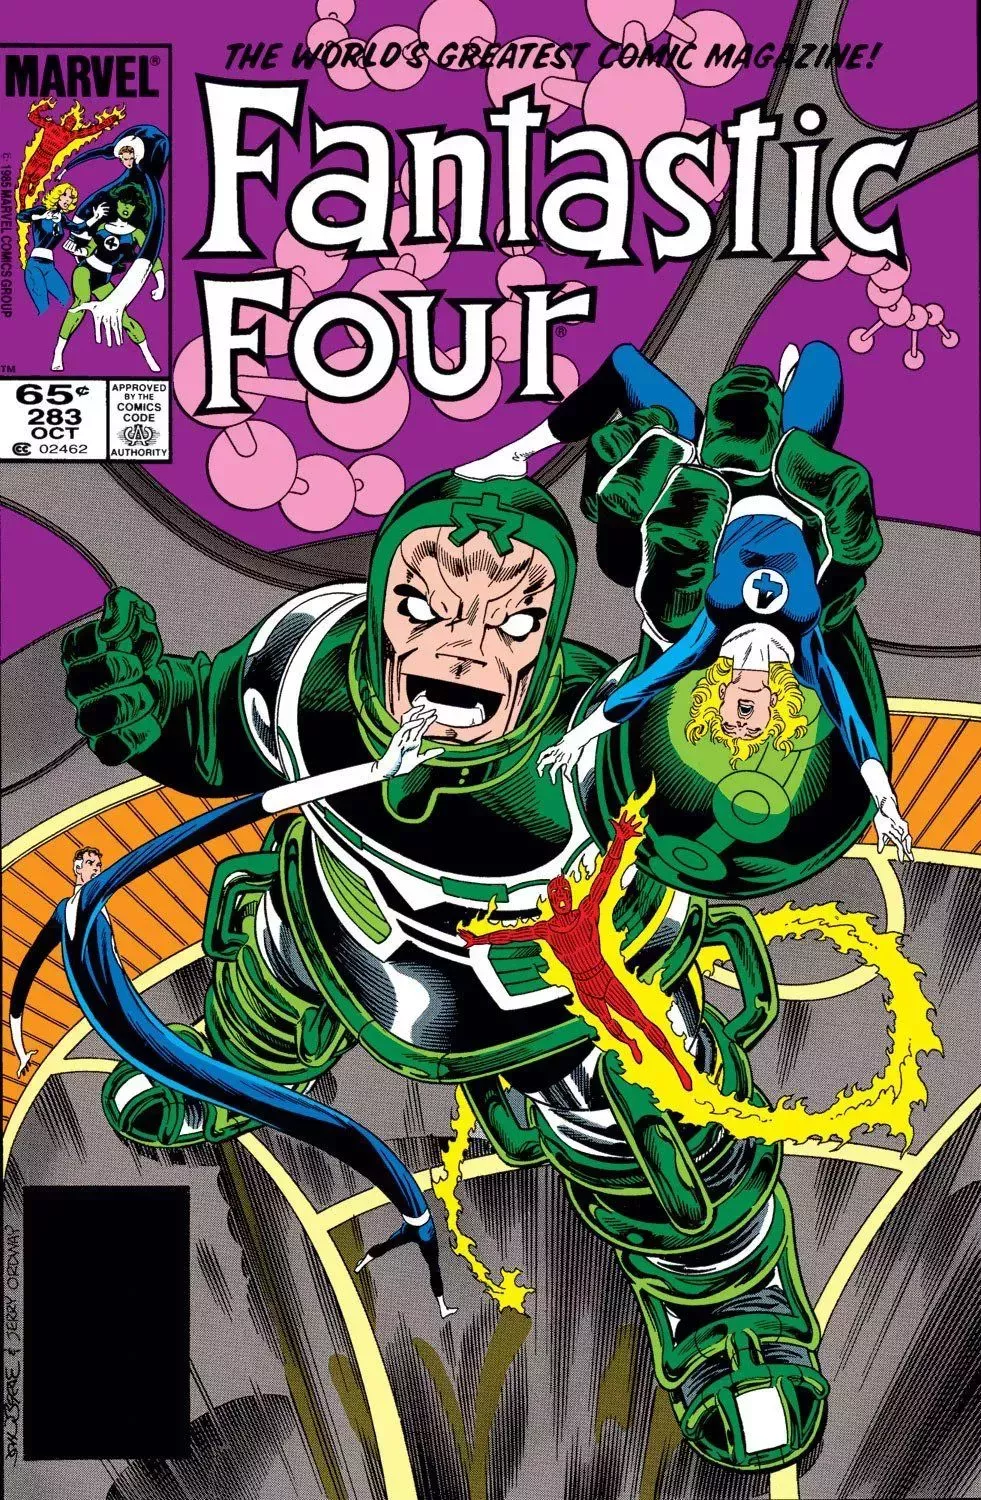 First appearance of Psycho-Man, a fantastic four villain from Marvel comics